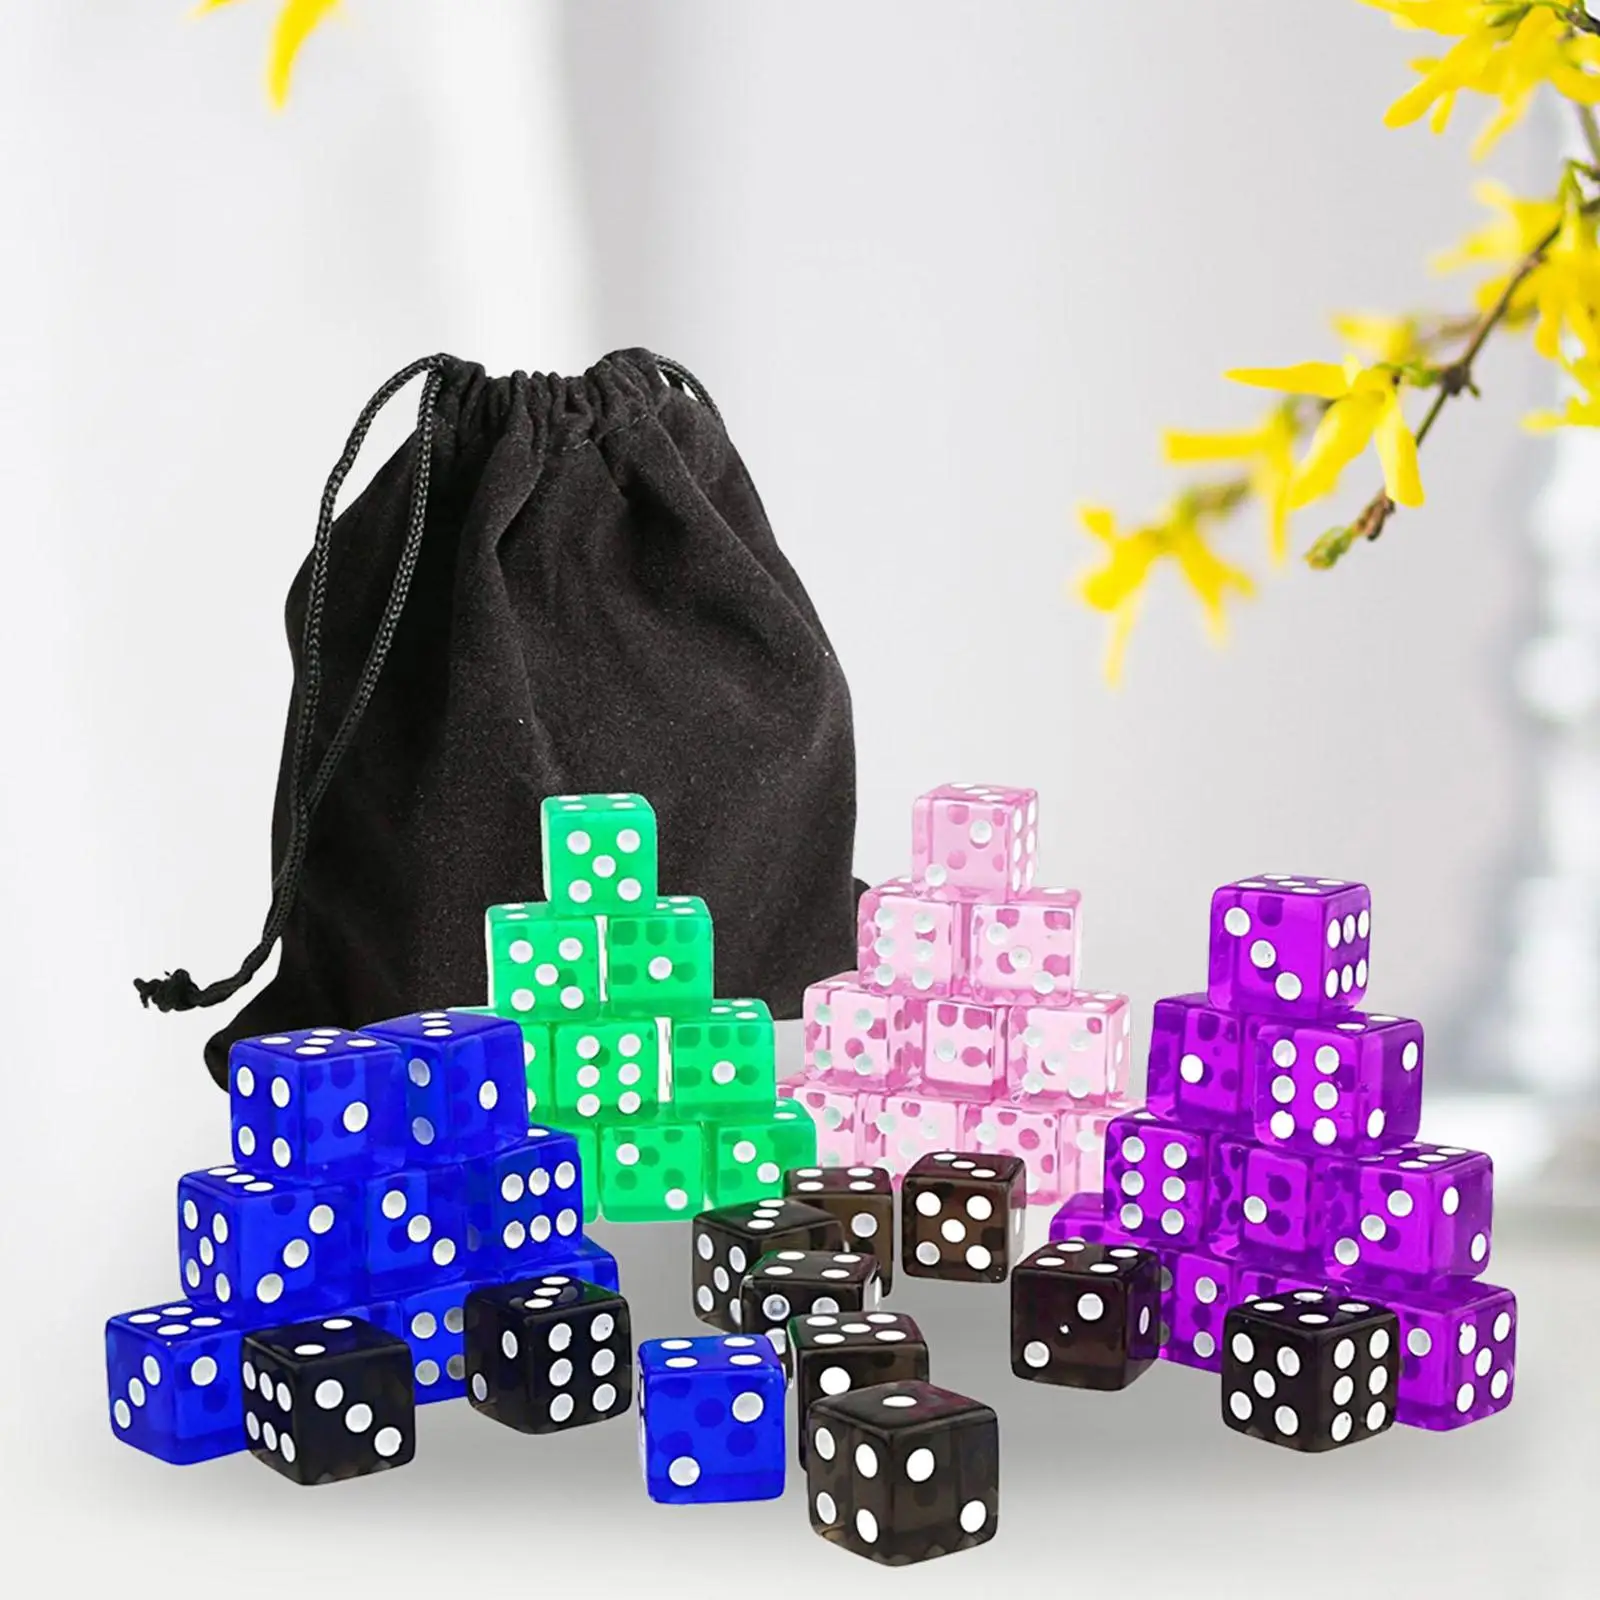 50x 6 Sided Dices Playing Dices Game Dices Colored Dices Math Teaching Toy Party Supplies 16mm Dices for Role Playing Game